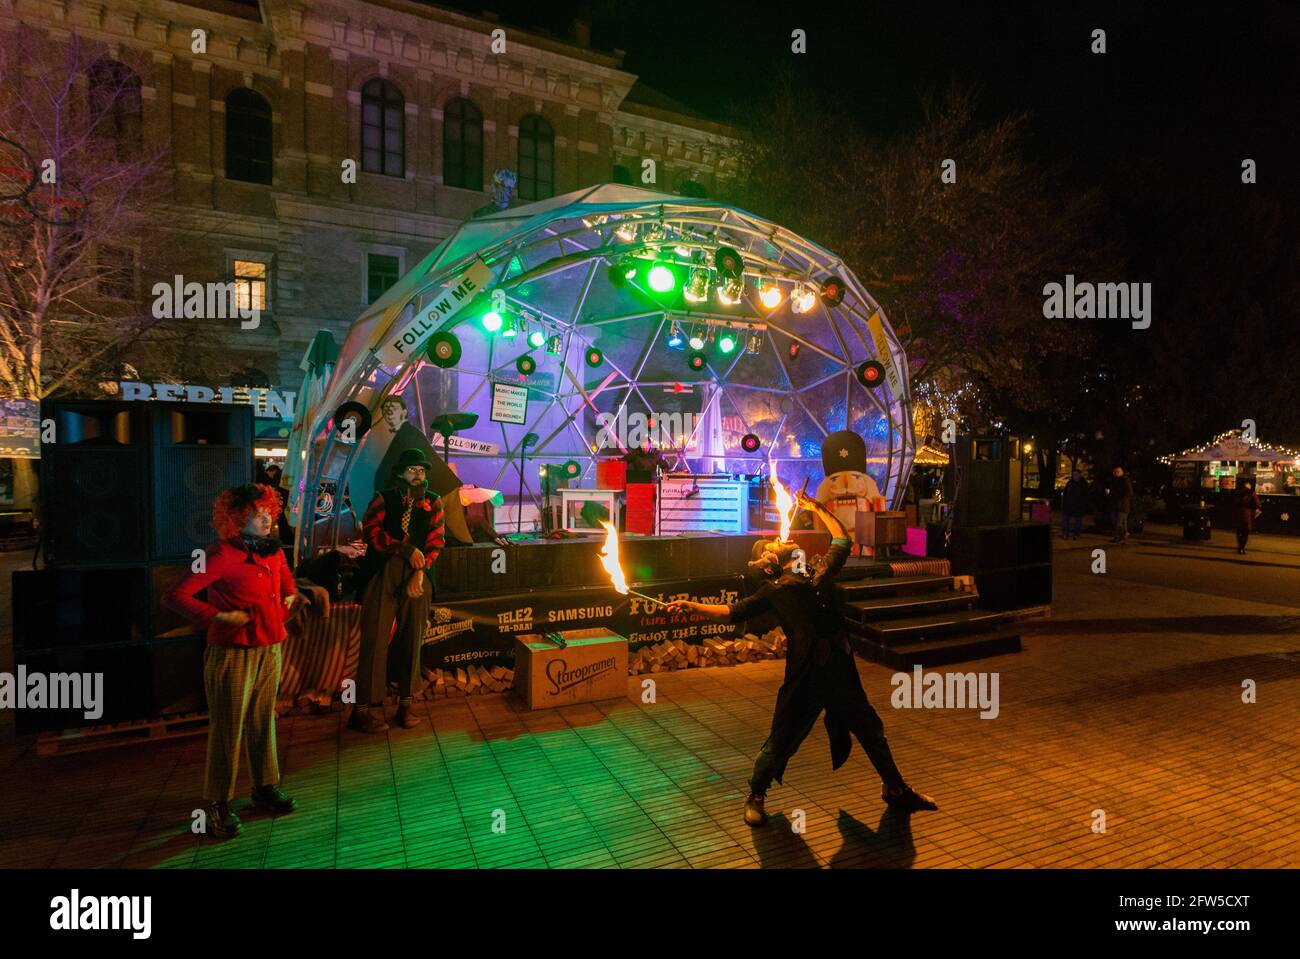 Fire eaters entertaining people during the advent in town Zagreb, Croatia Stock Photo